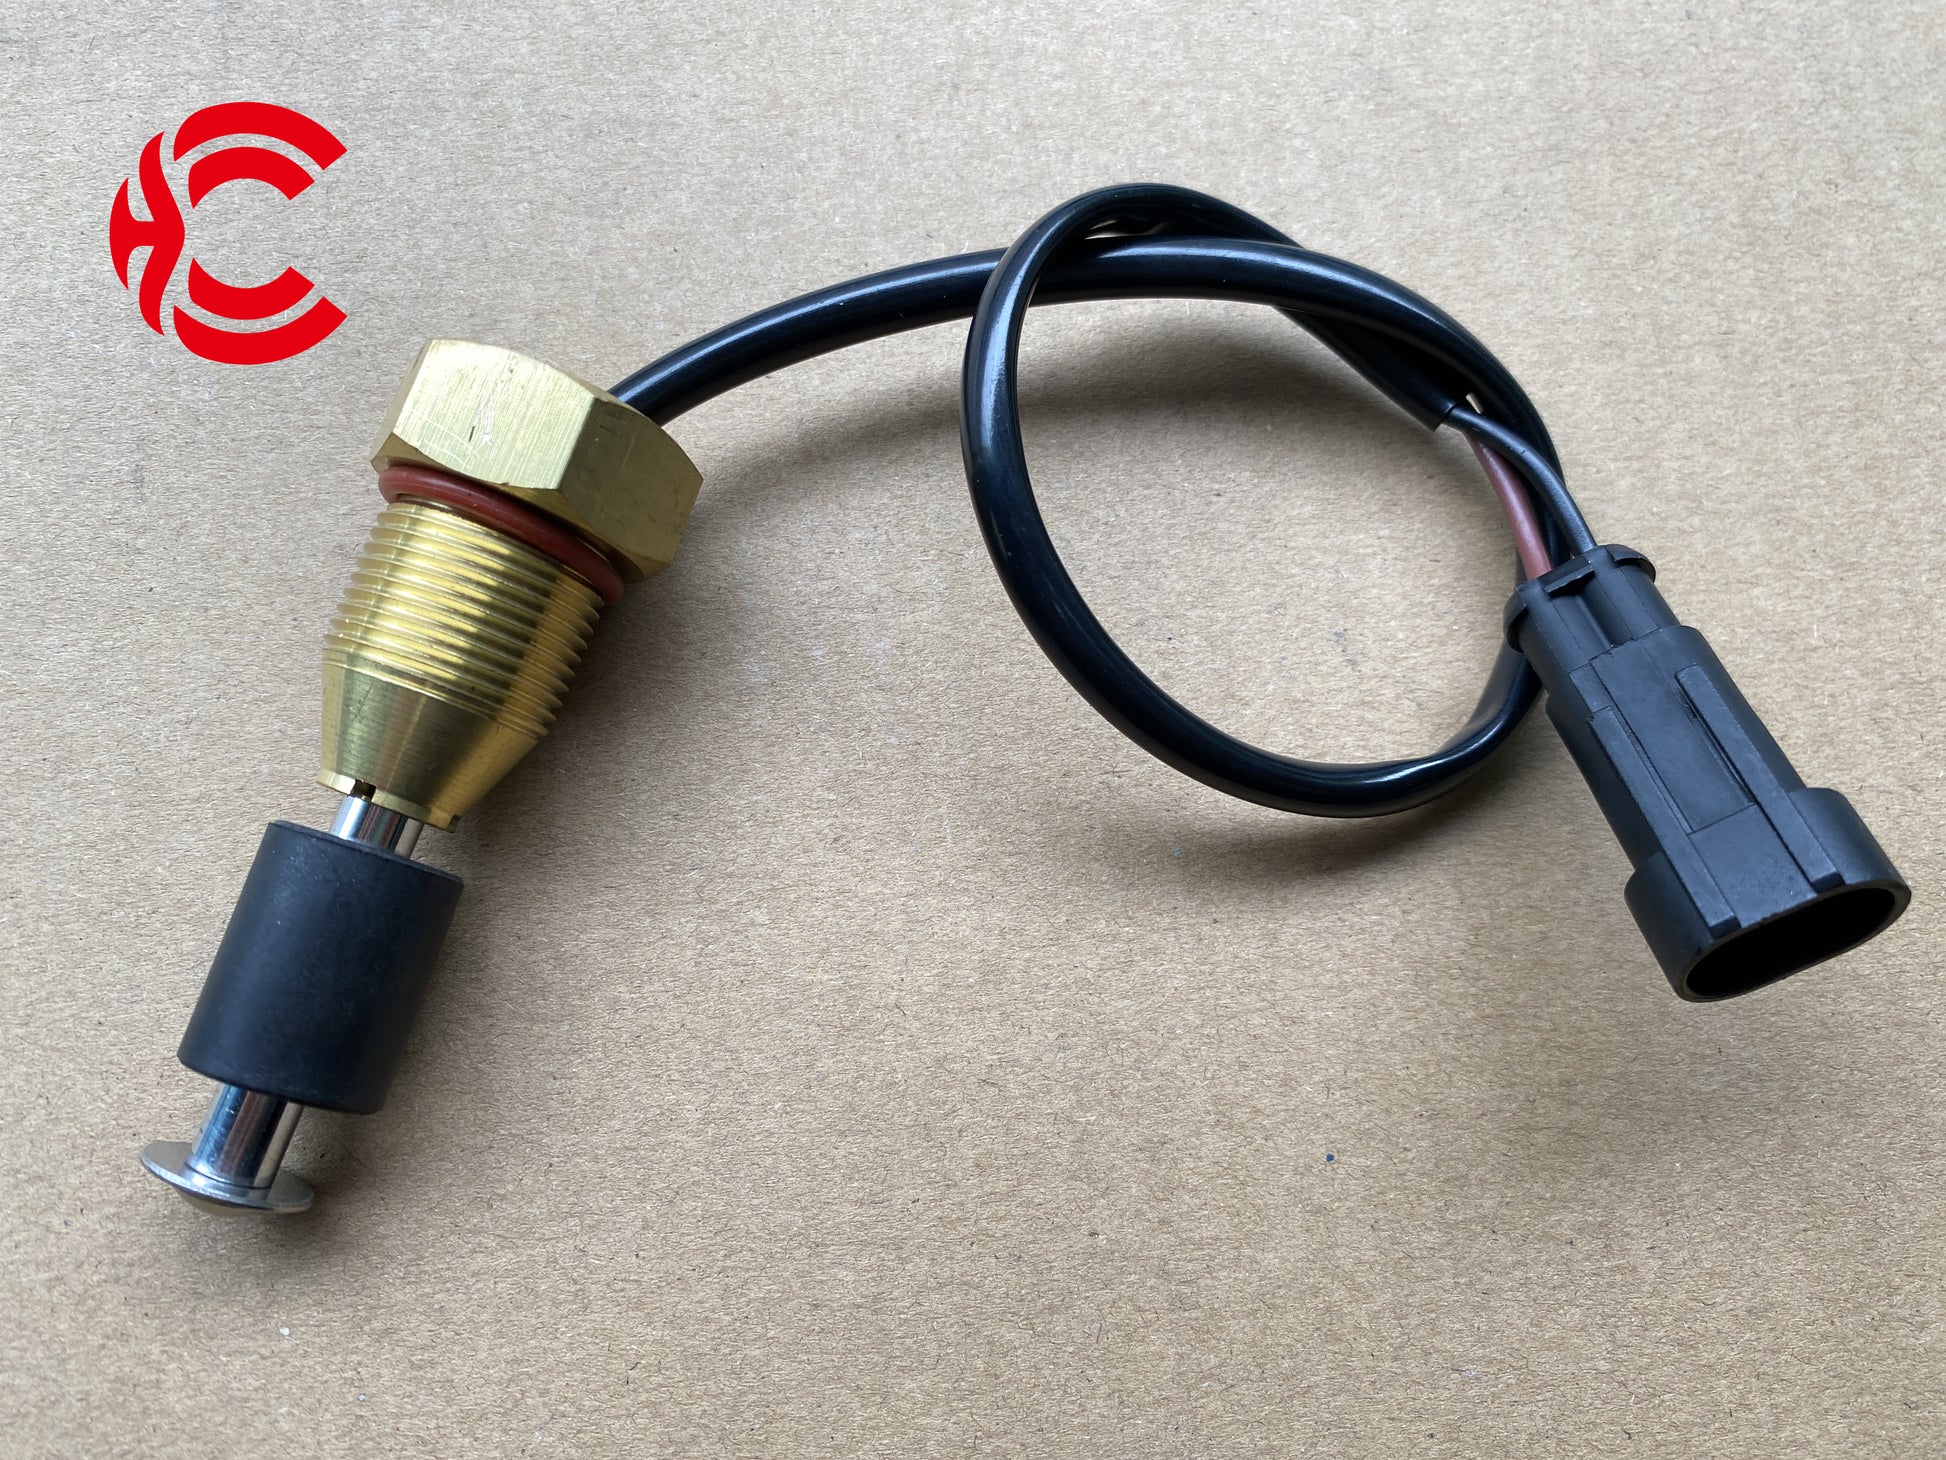 OEM: 6122K01-3820810 GOLDEN DRAGONMaterial: ABSColor: BlackOrigin: Made in ChinaWeight: 50gPacking List: 1* Coolant Level Alarm Sensor More ServiceWe can provide OEM Manufacturing serviceWe can Be your one-step solution for Auto PartsWe can provide technical scheme for you Feel Free to Contact Us, We will get back to you as soon as possible.